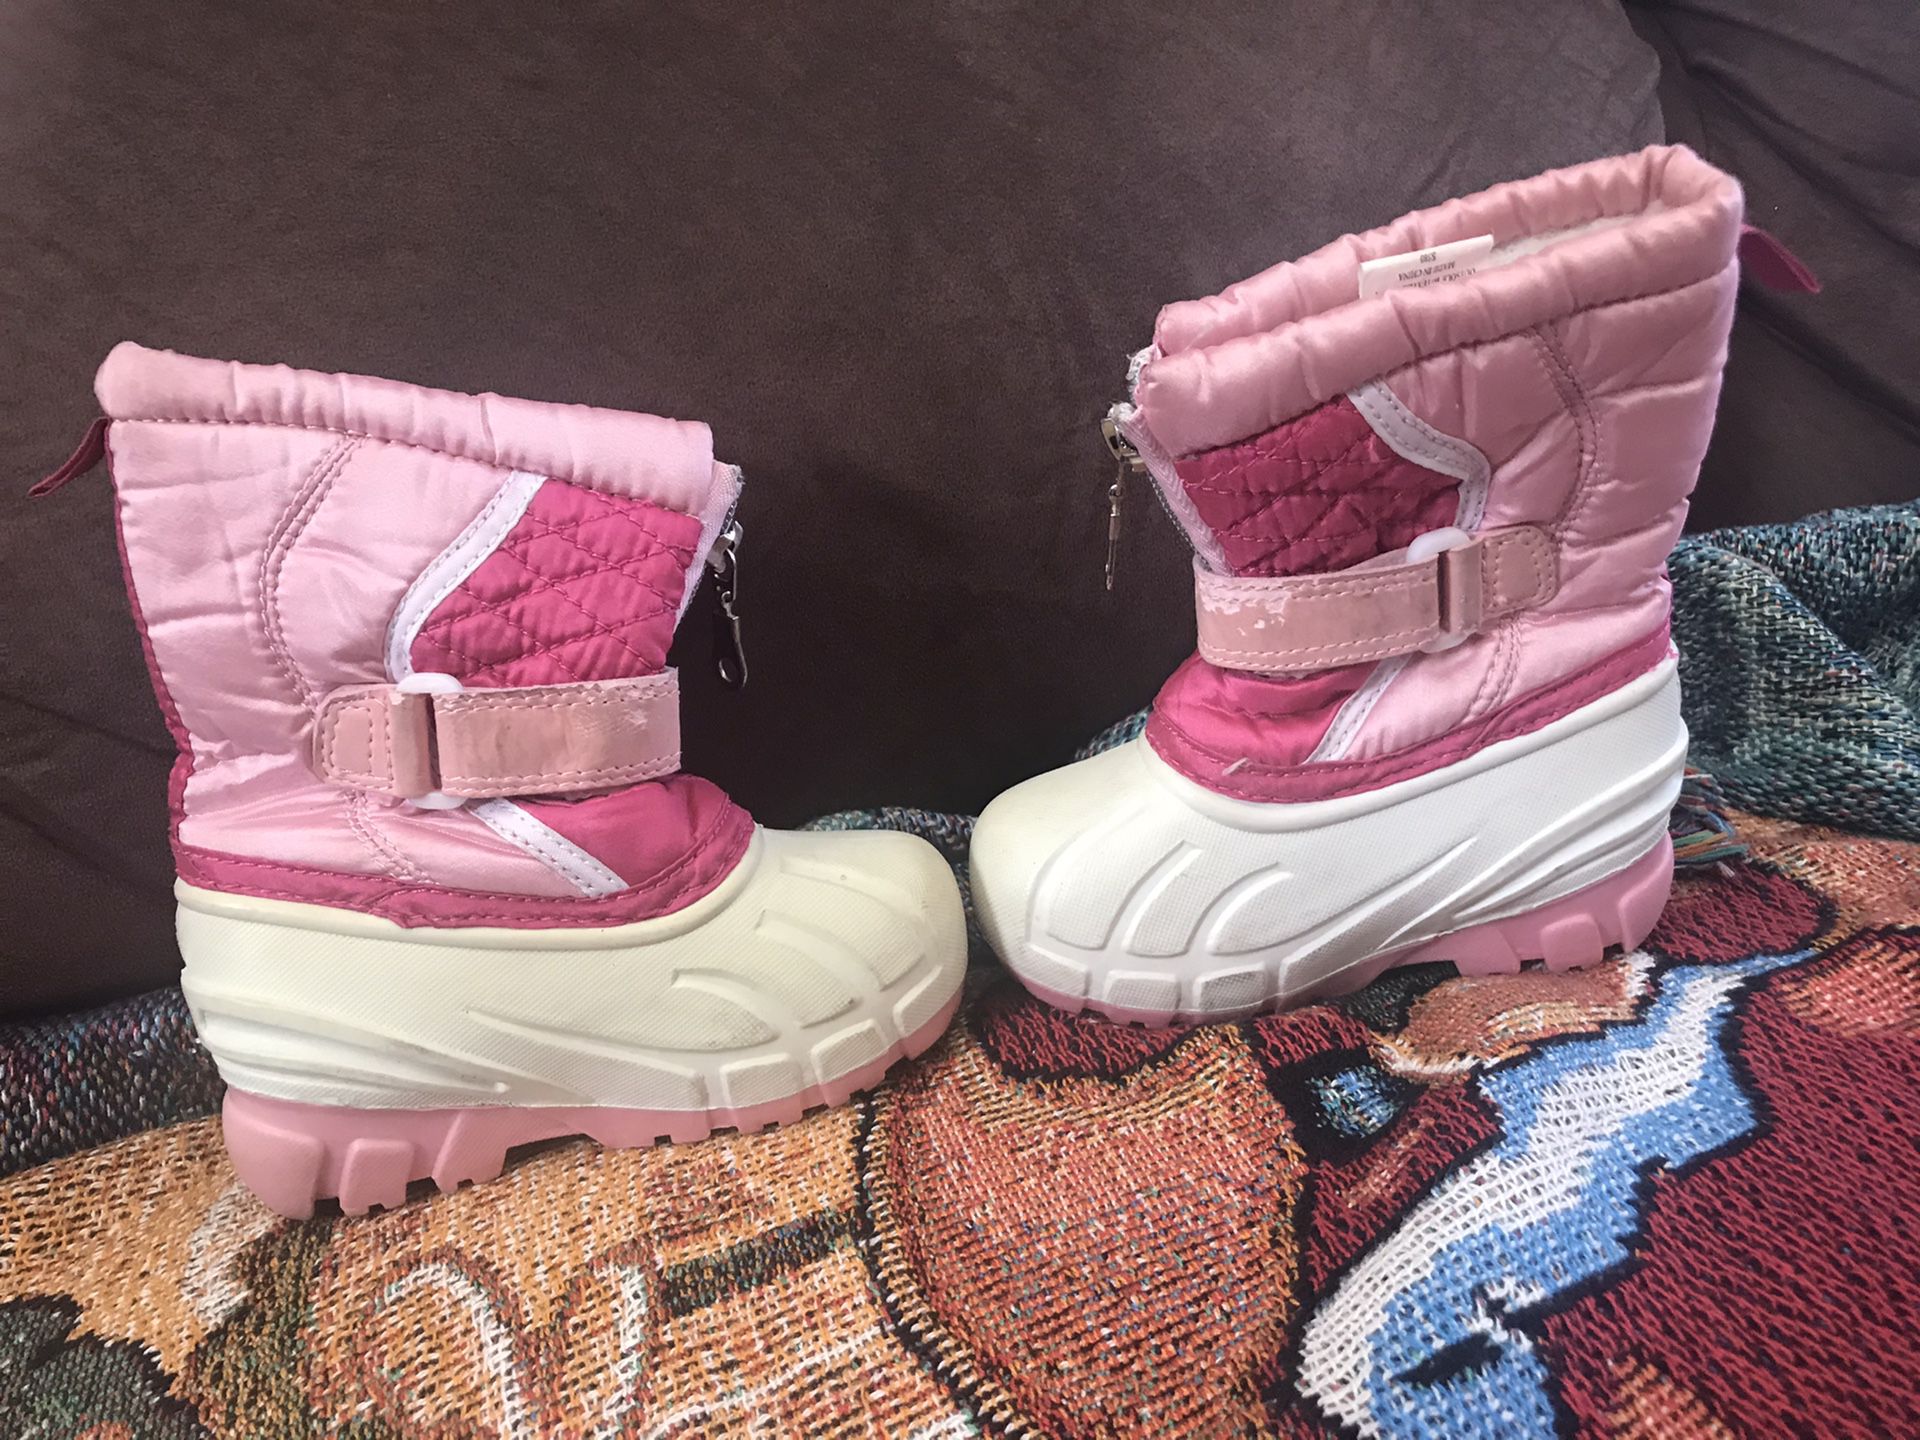 Toddler Winter Boots Size 6